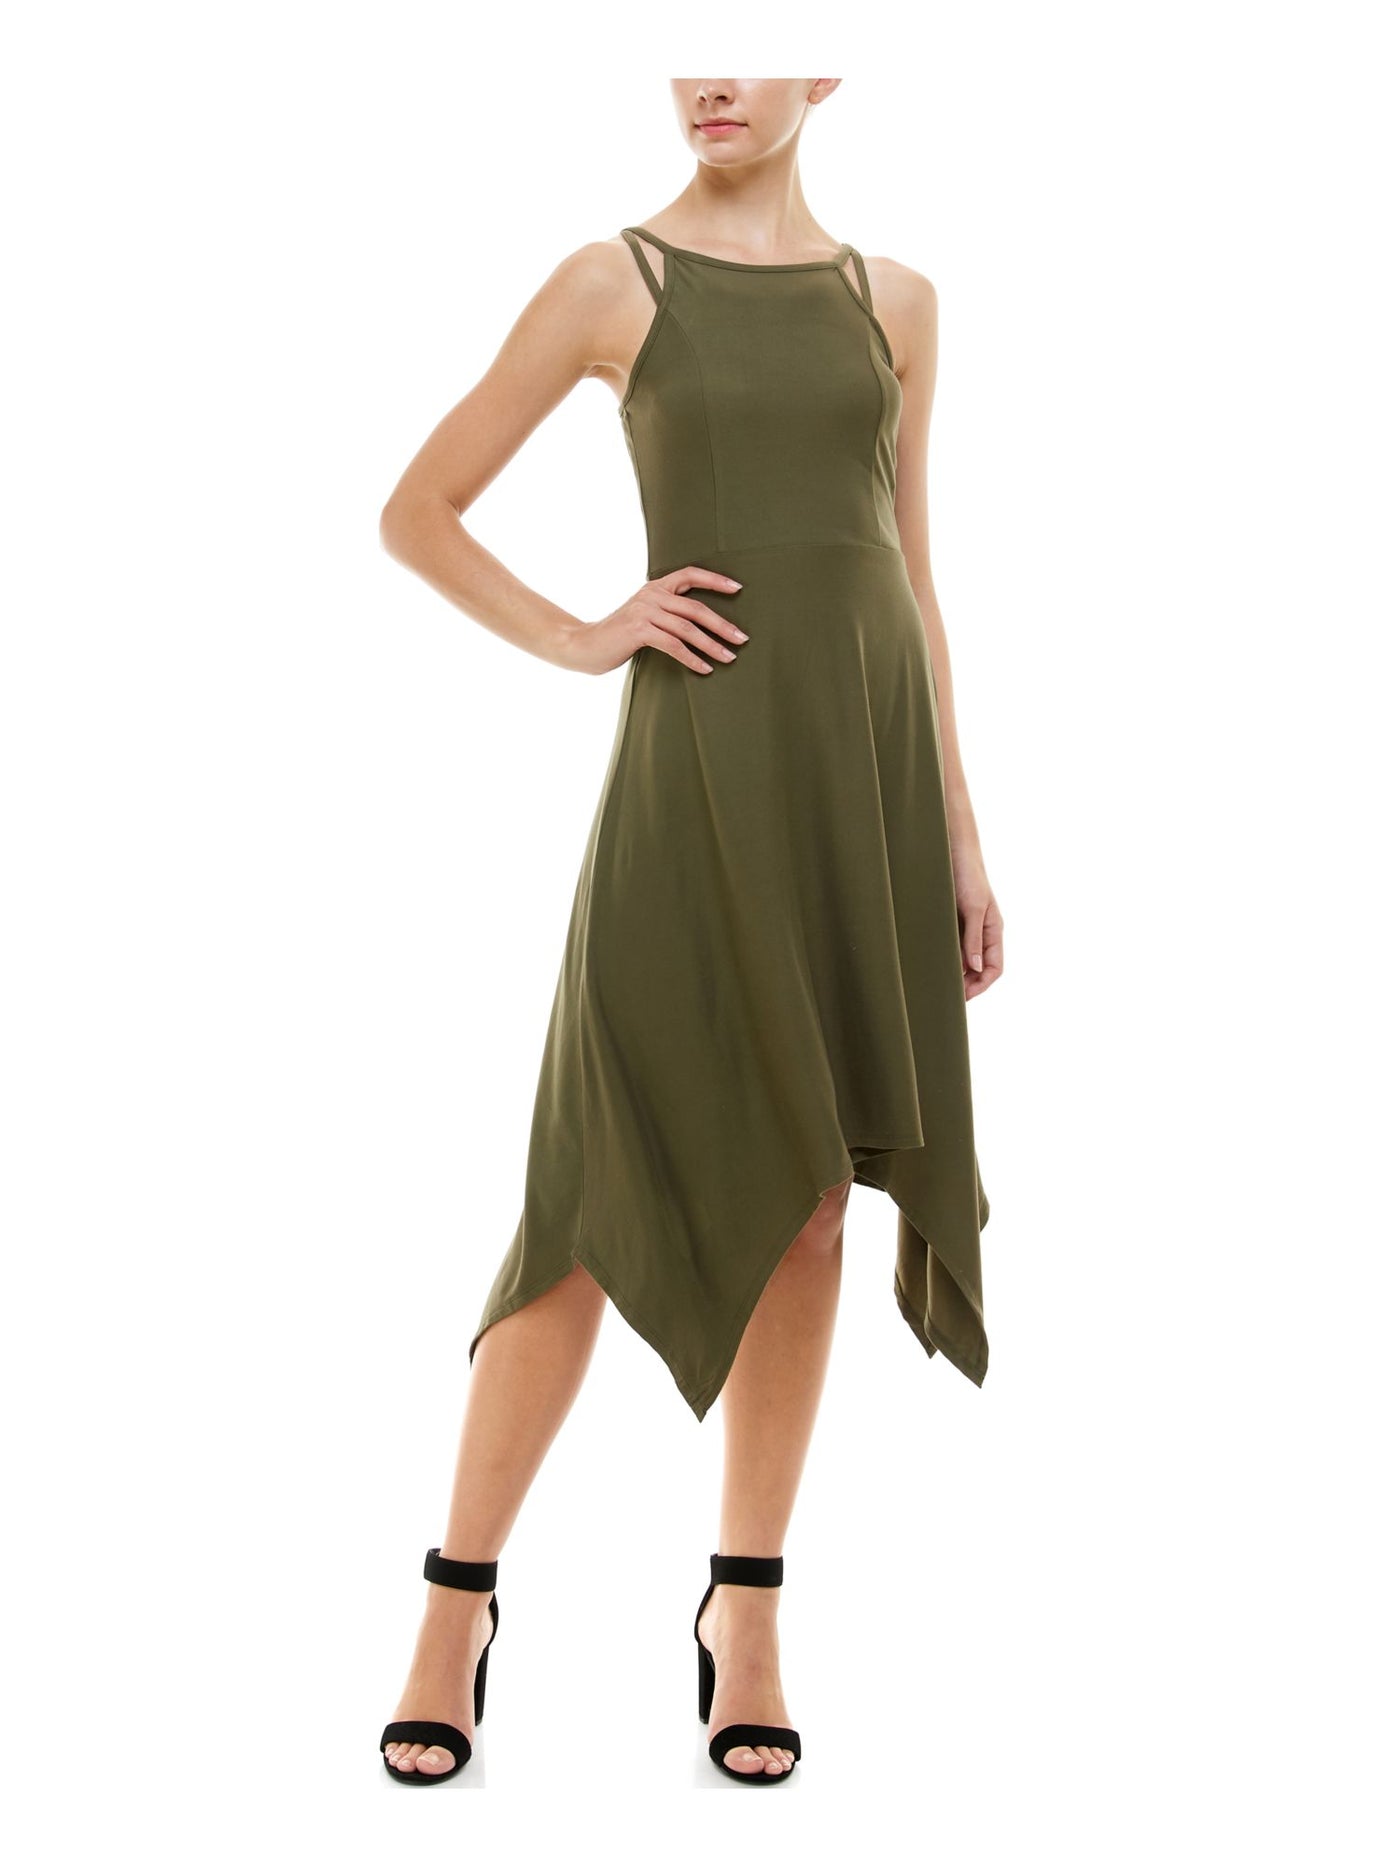 PLANET GOLD Womens Sleeveless Scoop Neck Midi Fit + Flare Dress